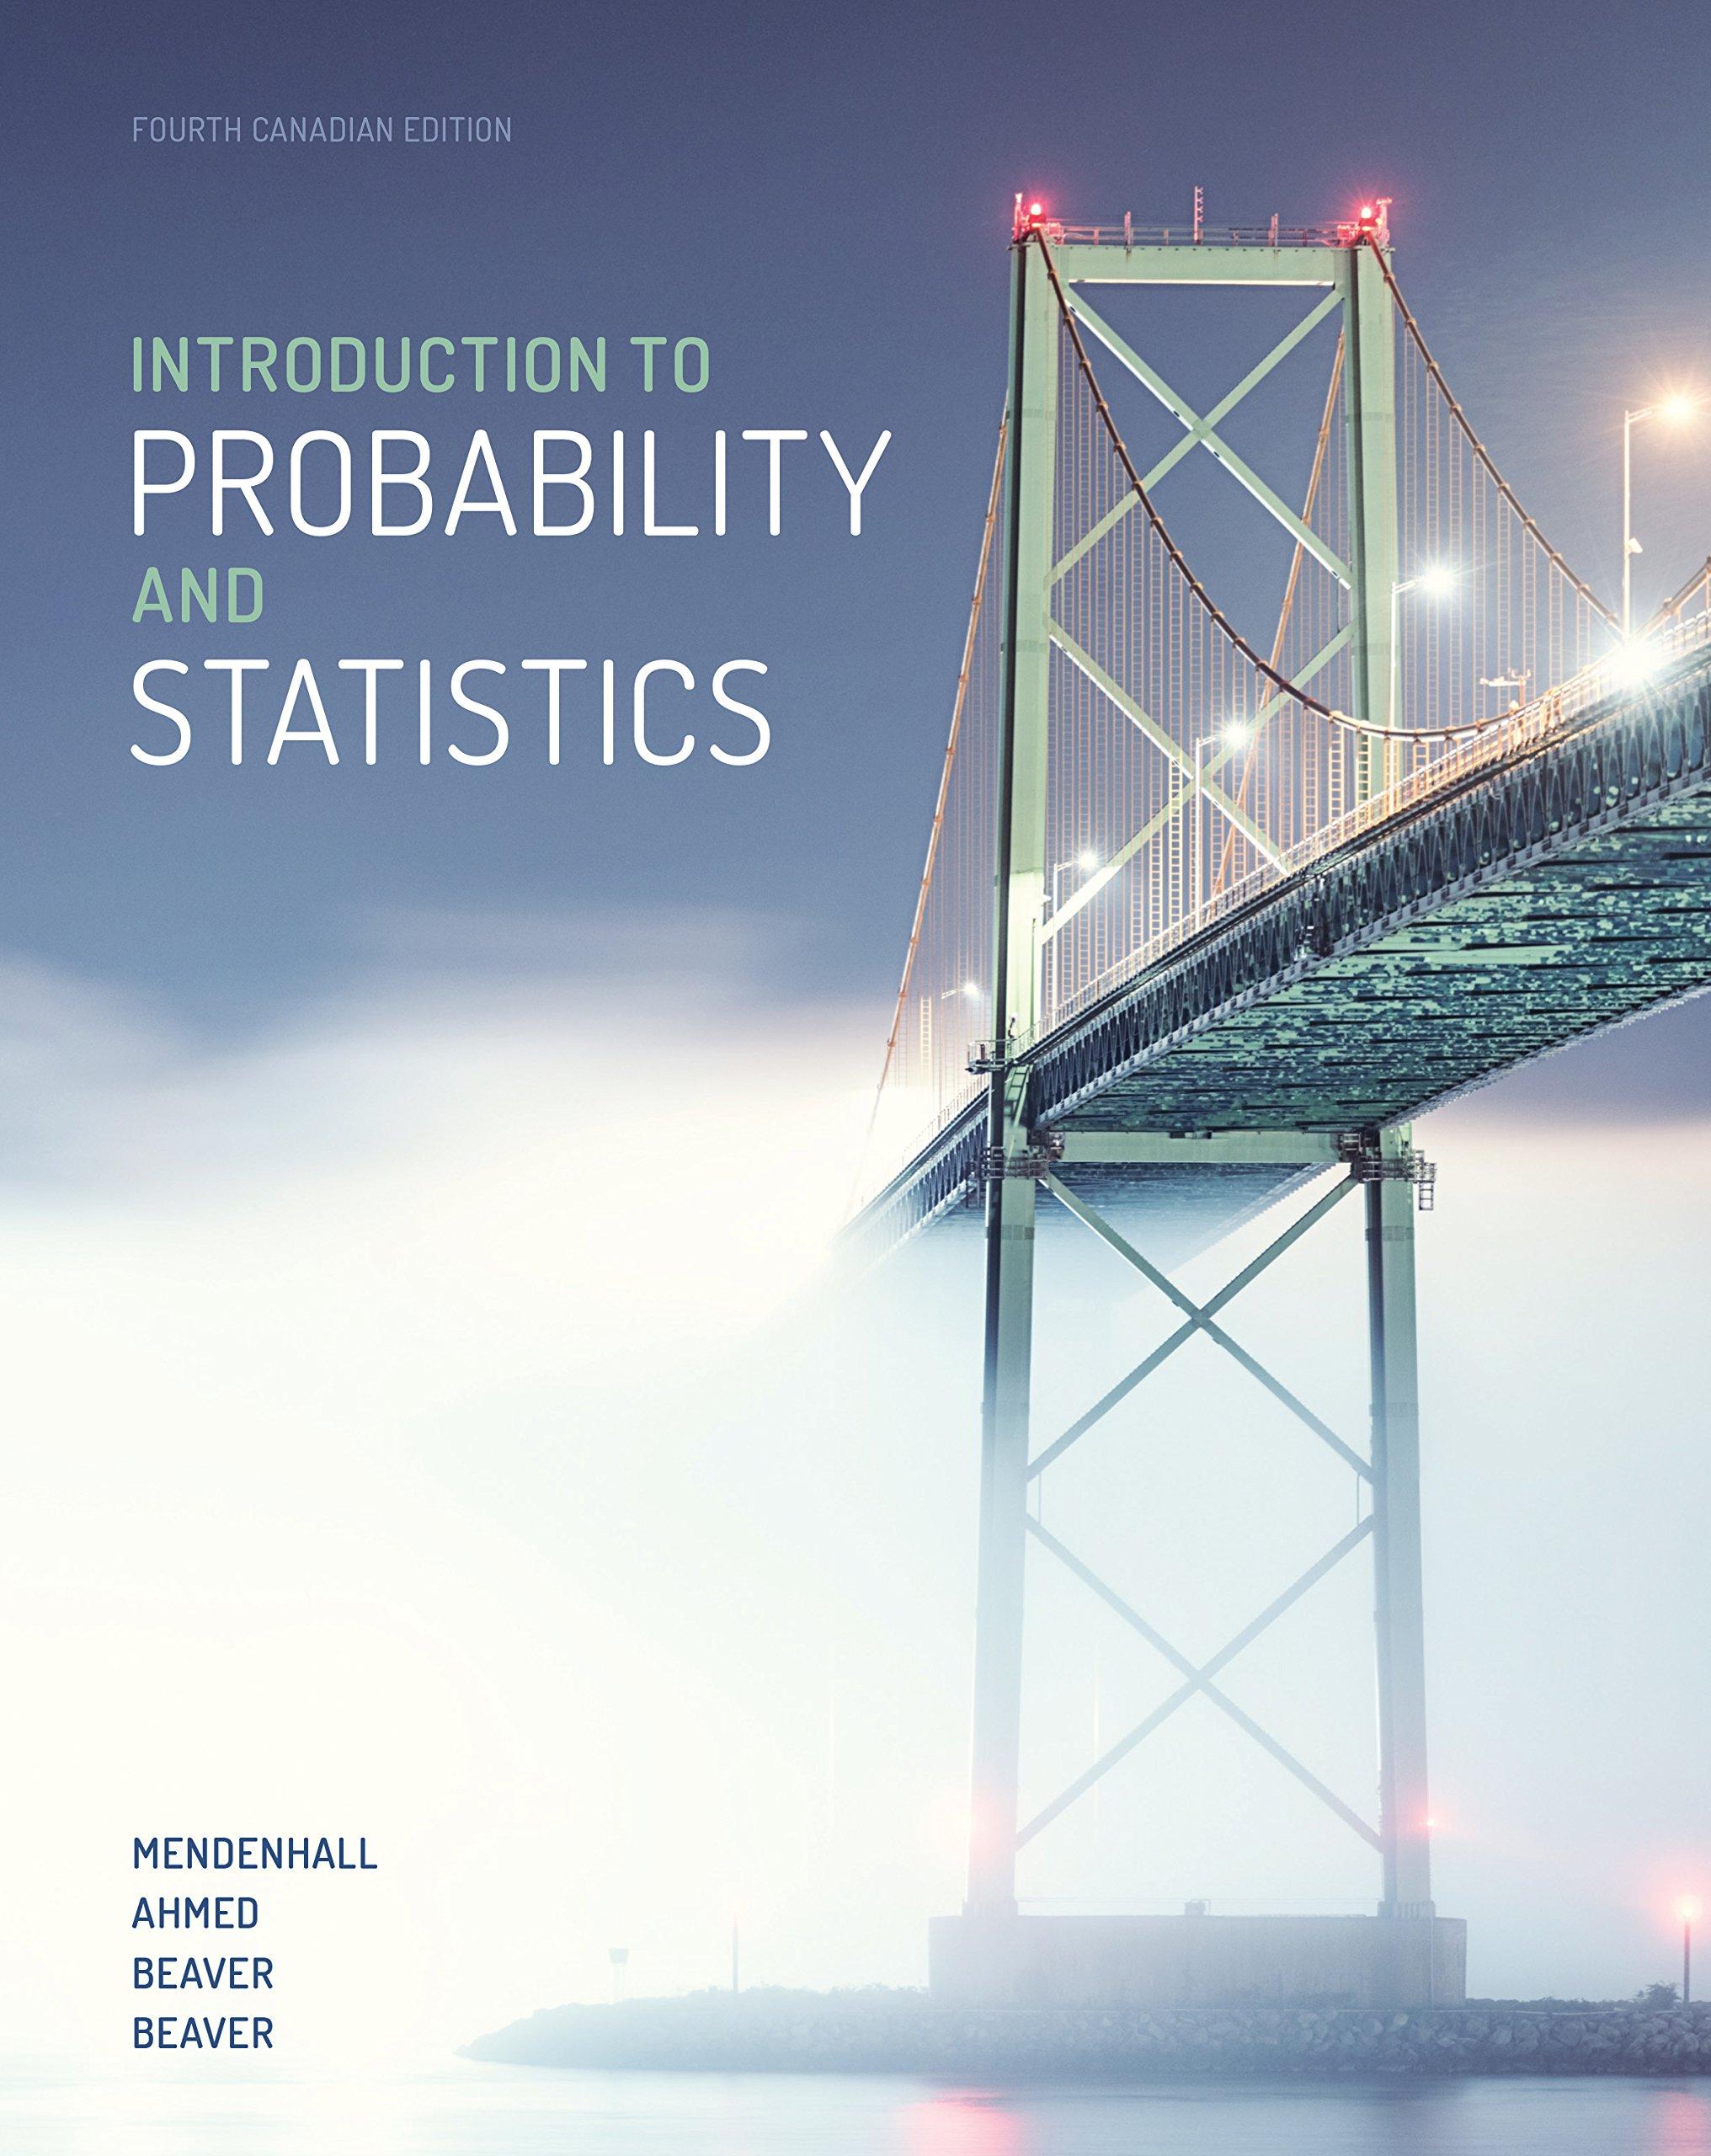 introduction to probability and statistics 4th canadian edition william mendenhall, s. ahmed, robert beaver,